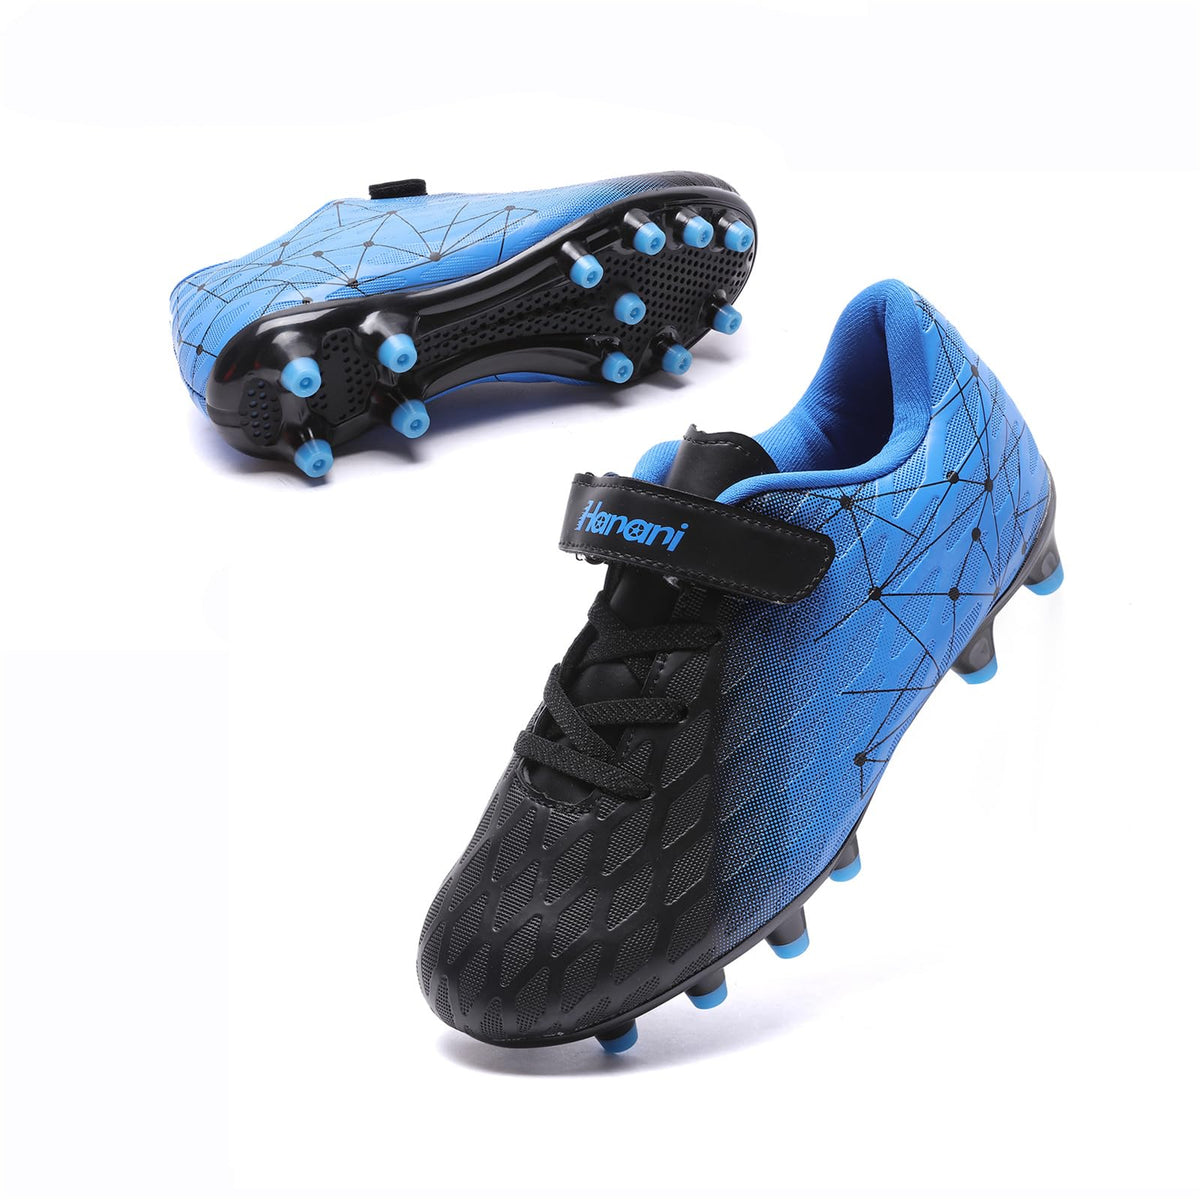 Boys Football Boots Shoes Kids Girls FG/AG Soccer Athletics Training Sport Running Shoes Profession Competition Teenager Indoor Outdoor Cleats Sneakers for Unisex Black Blue EU36 Convert 3UK